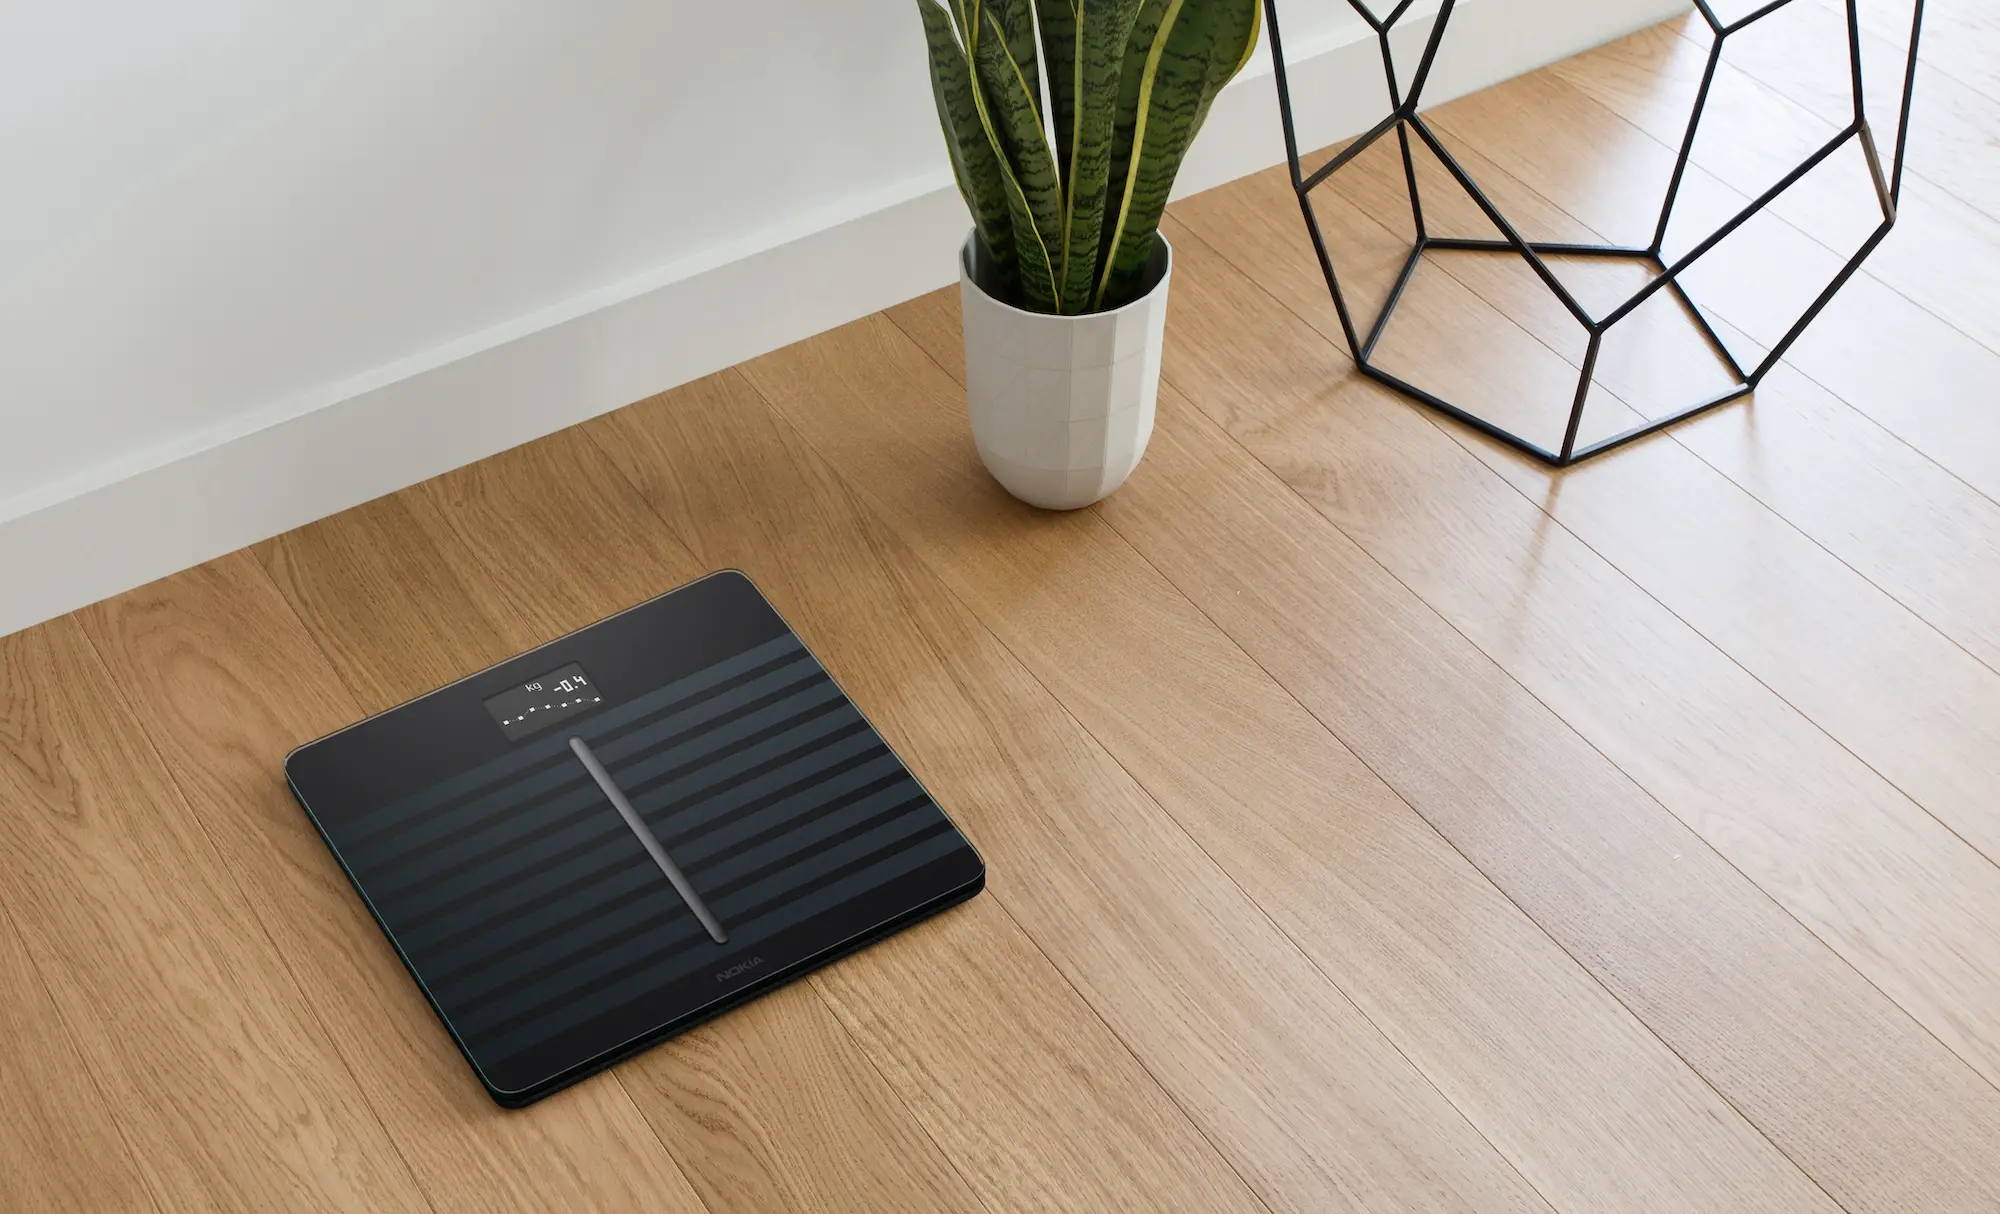 https://phandroid.com/wp-content/uploads/2021/05/Withings-Body-Cardio-Smart-Scale.jpg